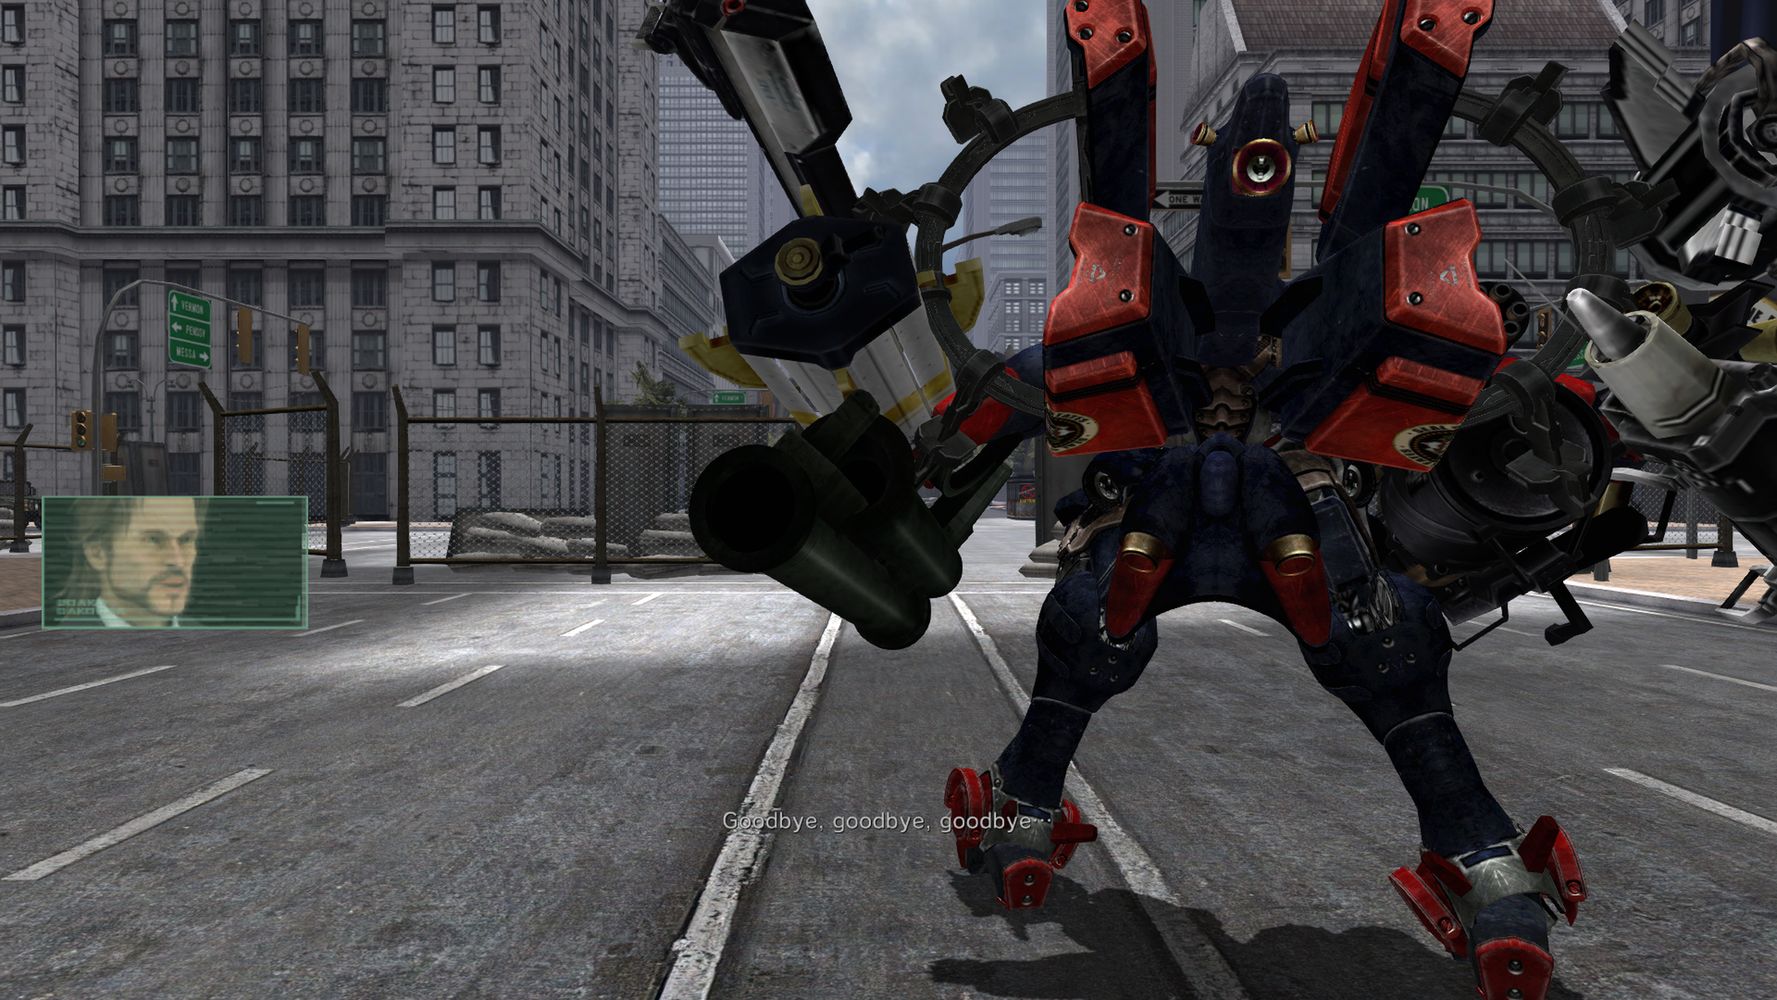 METAL WOLF CHAOS XD - Recensione